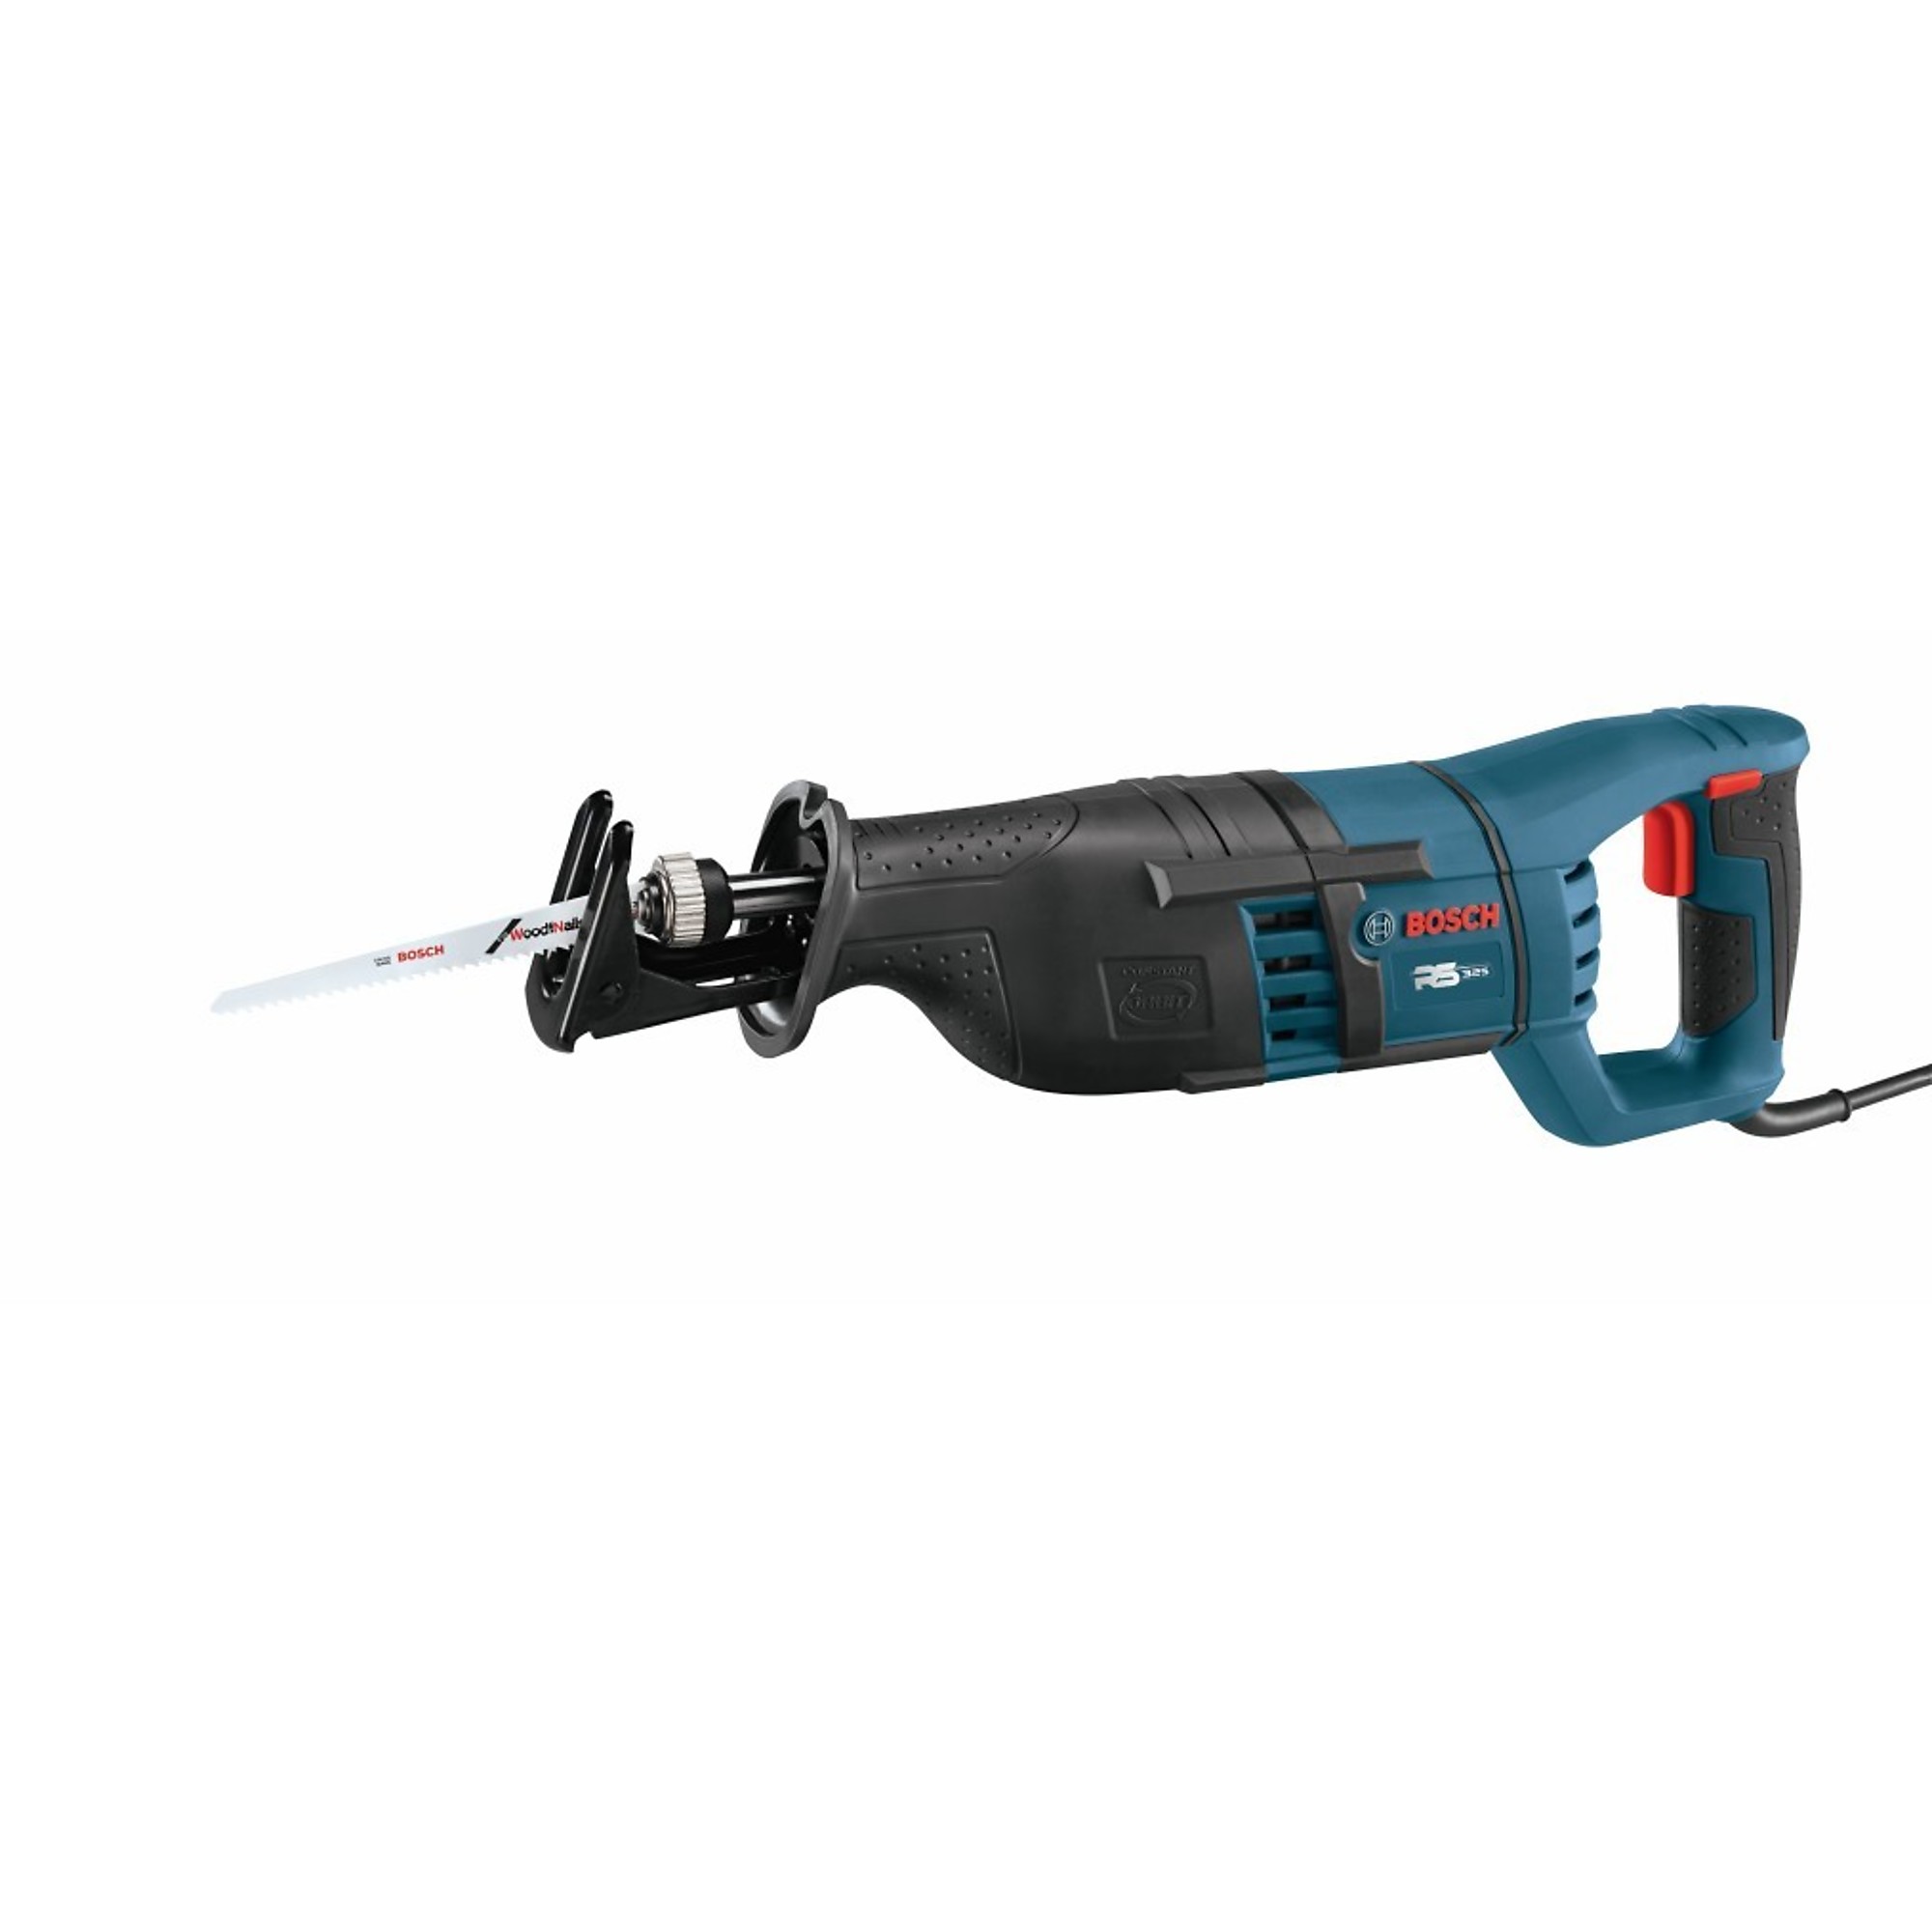 Bosch, 1Inch Compact Reciprocating Saw (12 Amp), Volts 120, Strokes Per Minute 0, Model RS325